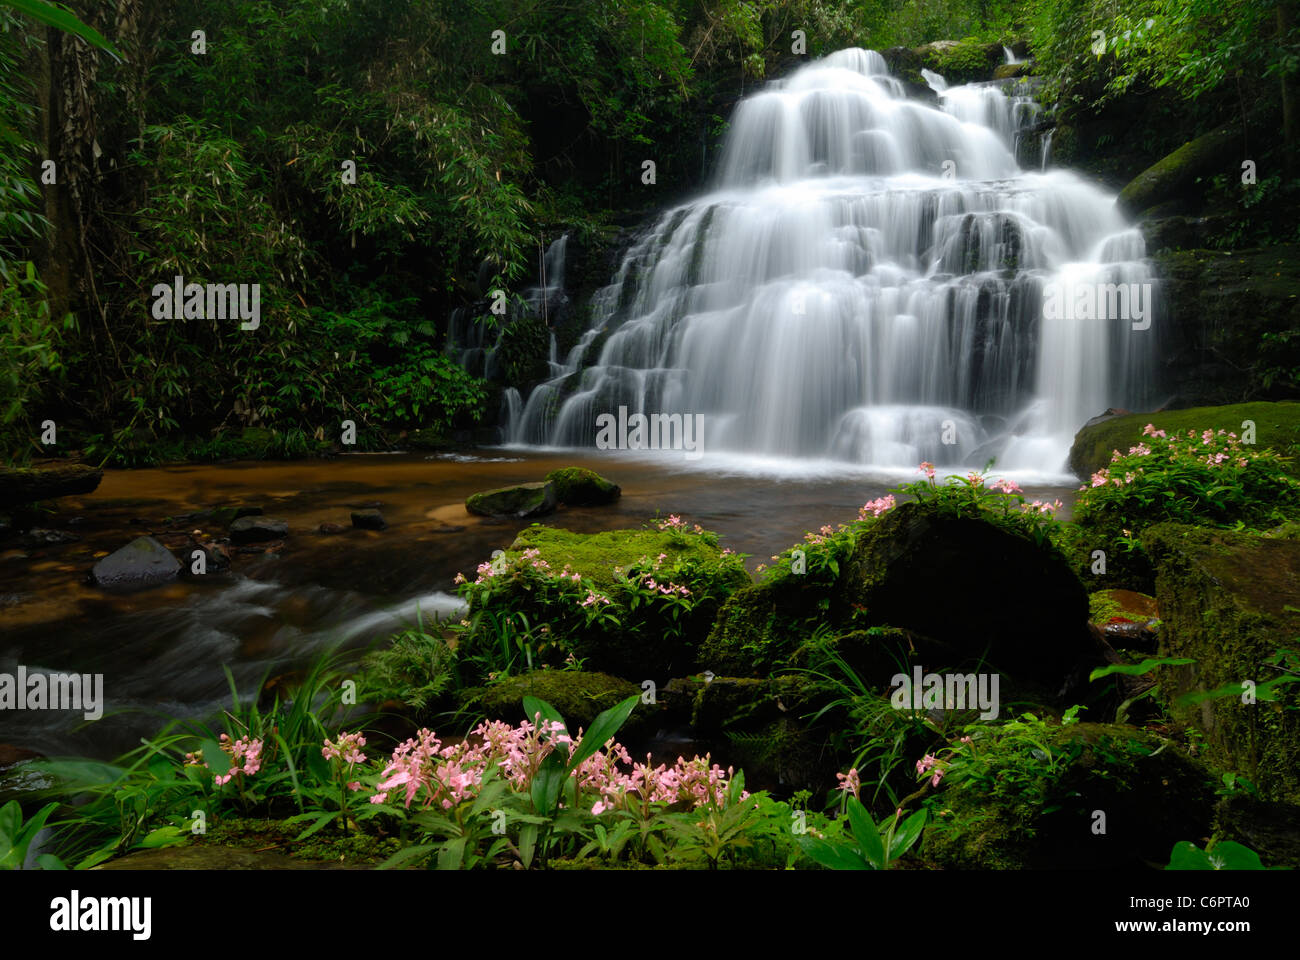 Wild orchid in front of a waterfall, Phu Hin Rong Kla national park, Thailand Stock Photo